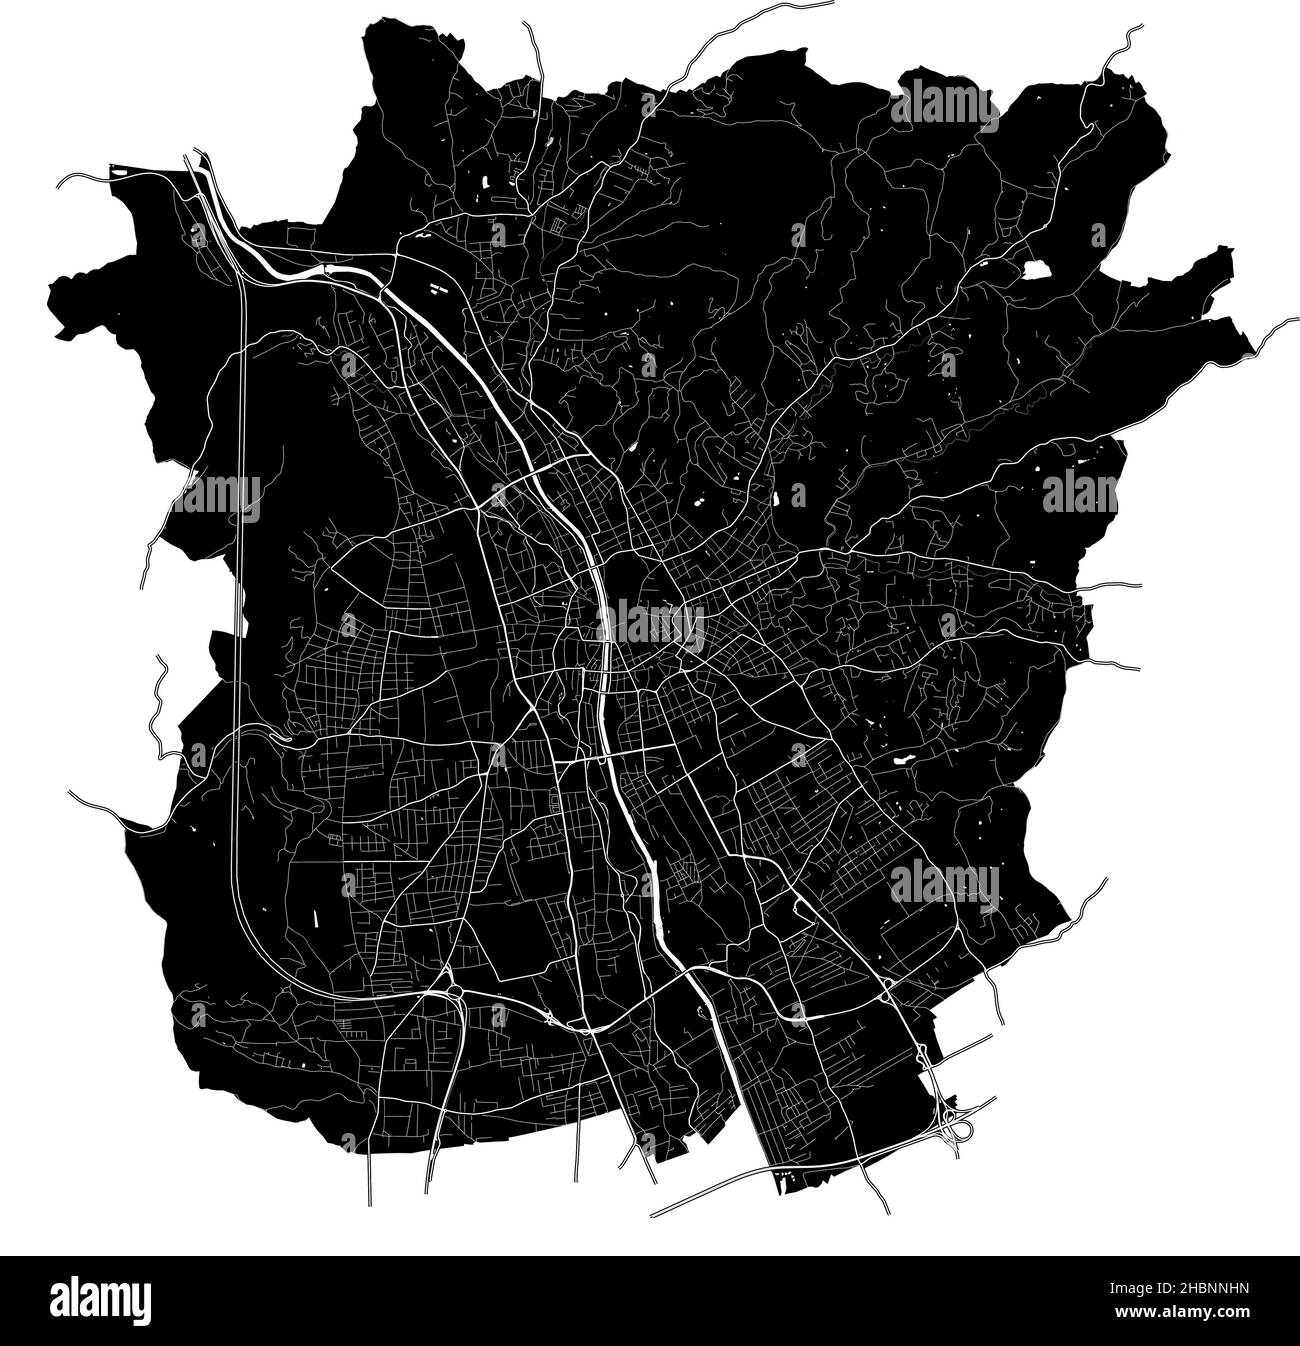 Graz, Austria, high resolution vector map with city boundaries, and editable paths. The city map was drawn with white areas and lines for main roads, Stock Vector